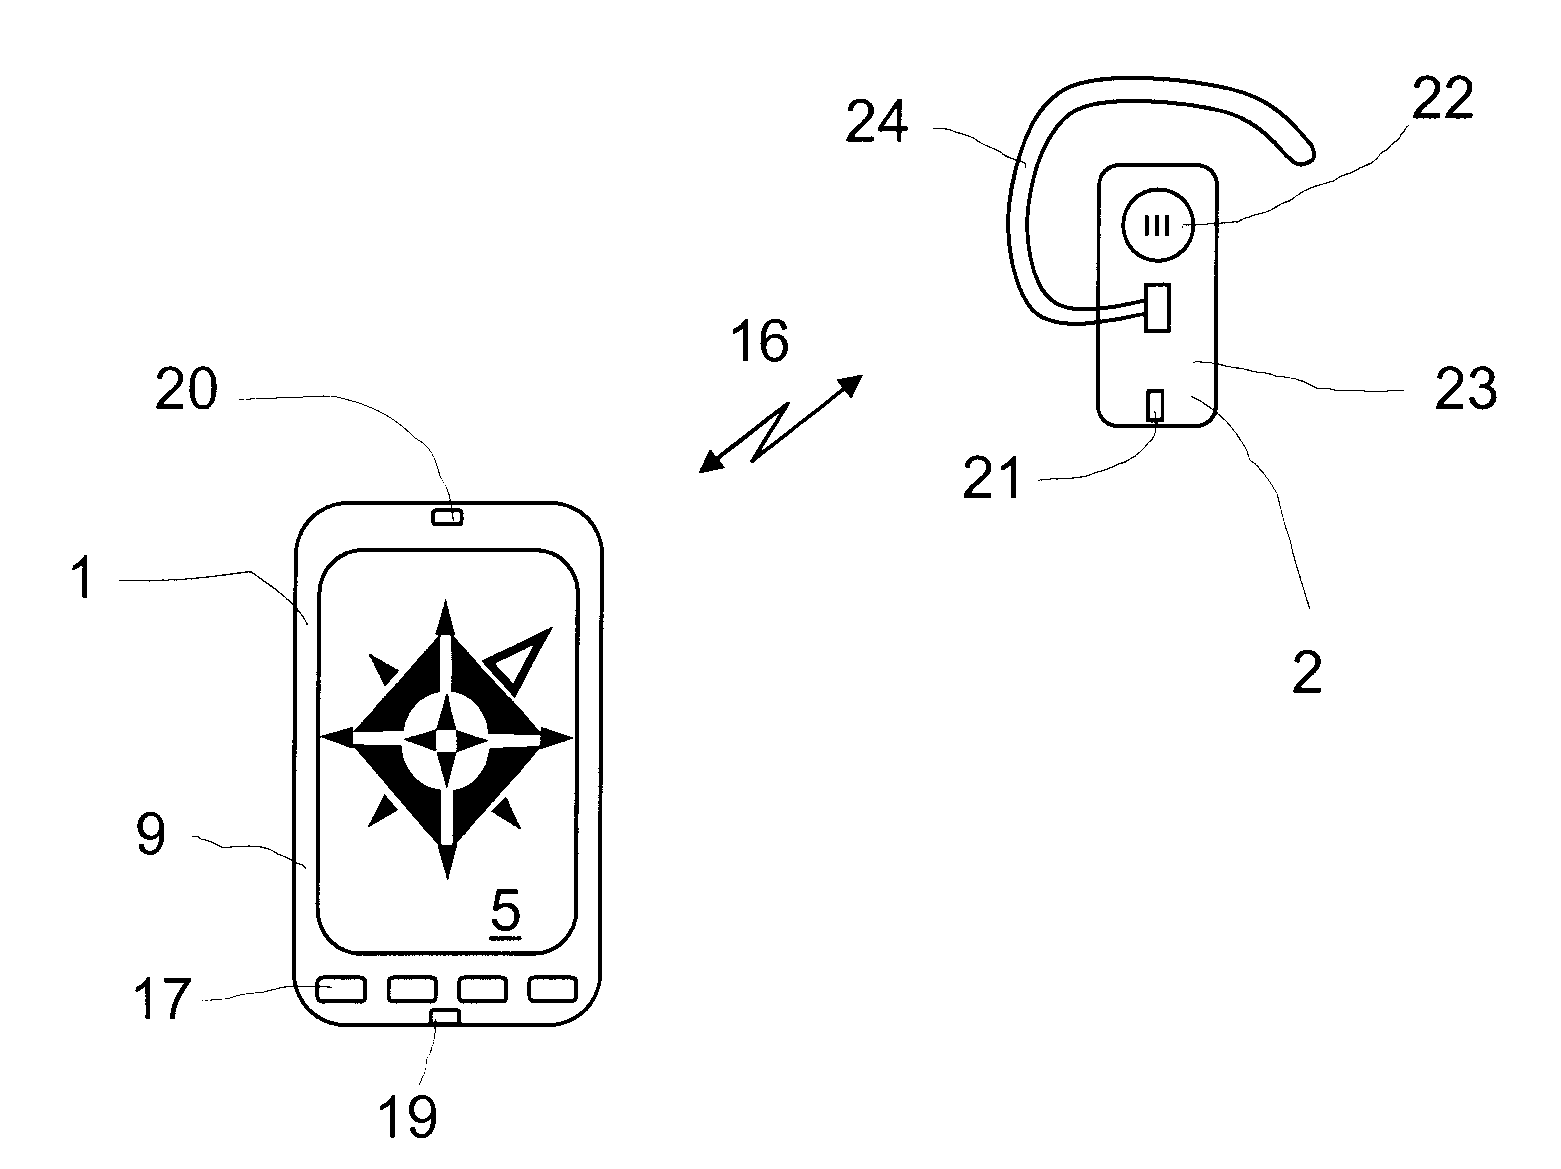 Method For Locating A Wirelessly Connected Device